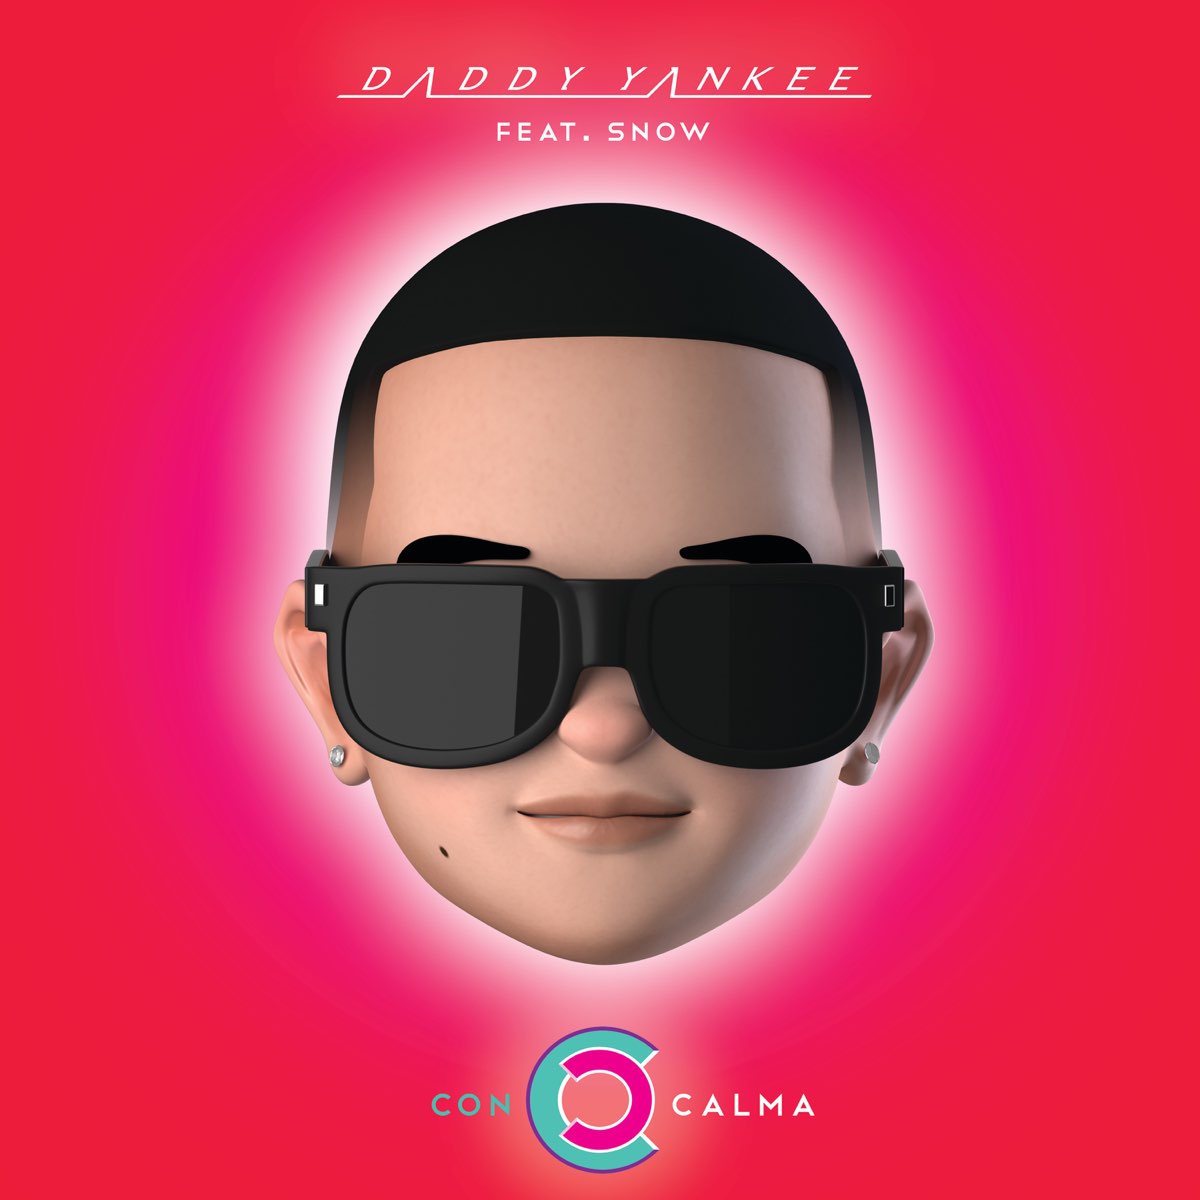 Con Calma (feat. Snow) - Single by Daddy Yankee on Apple Music